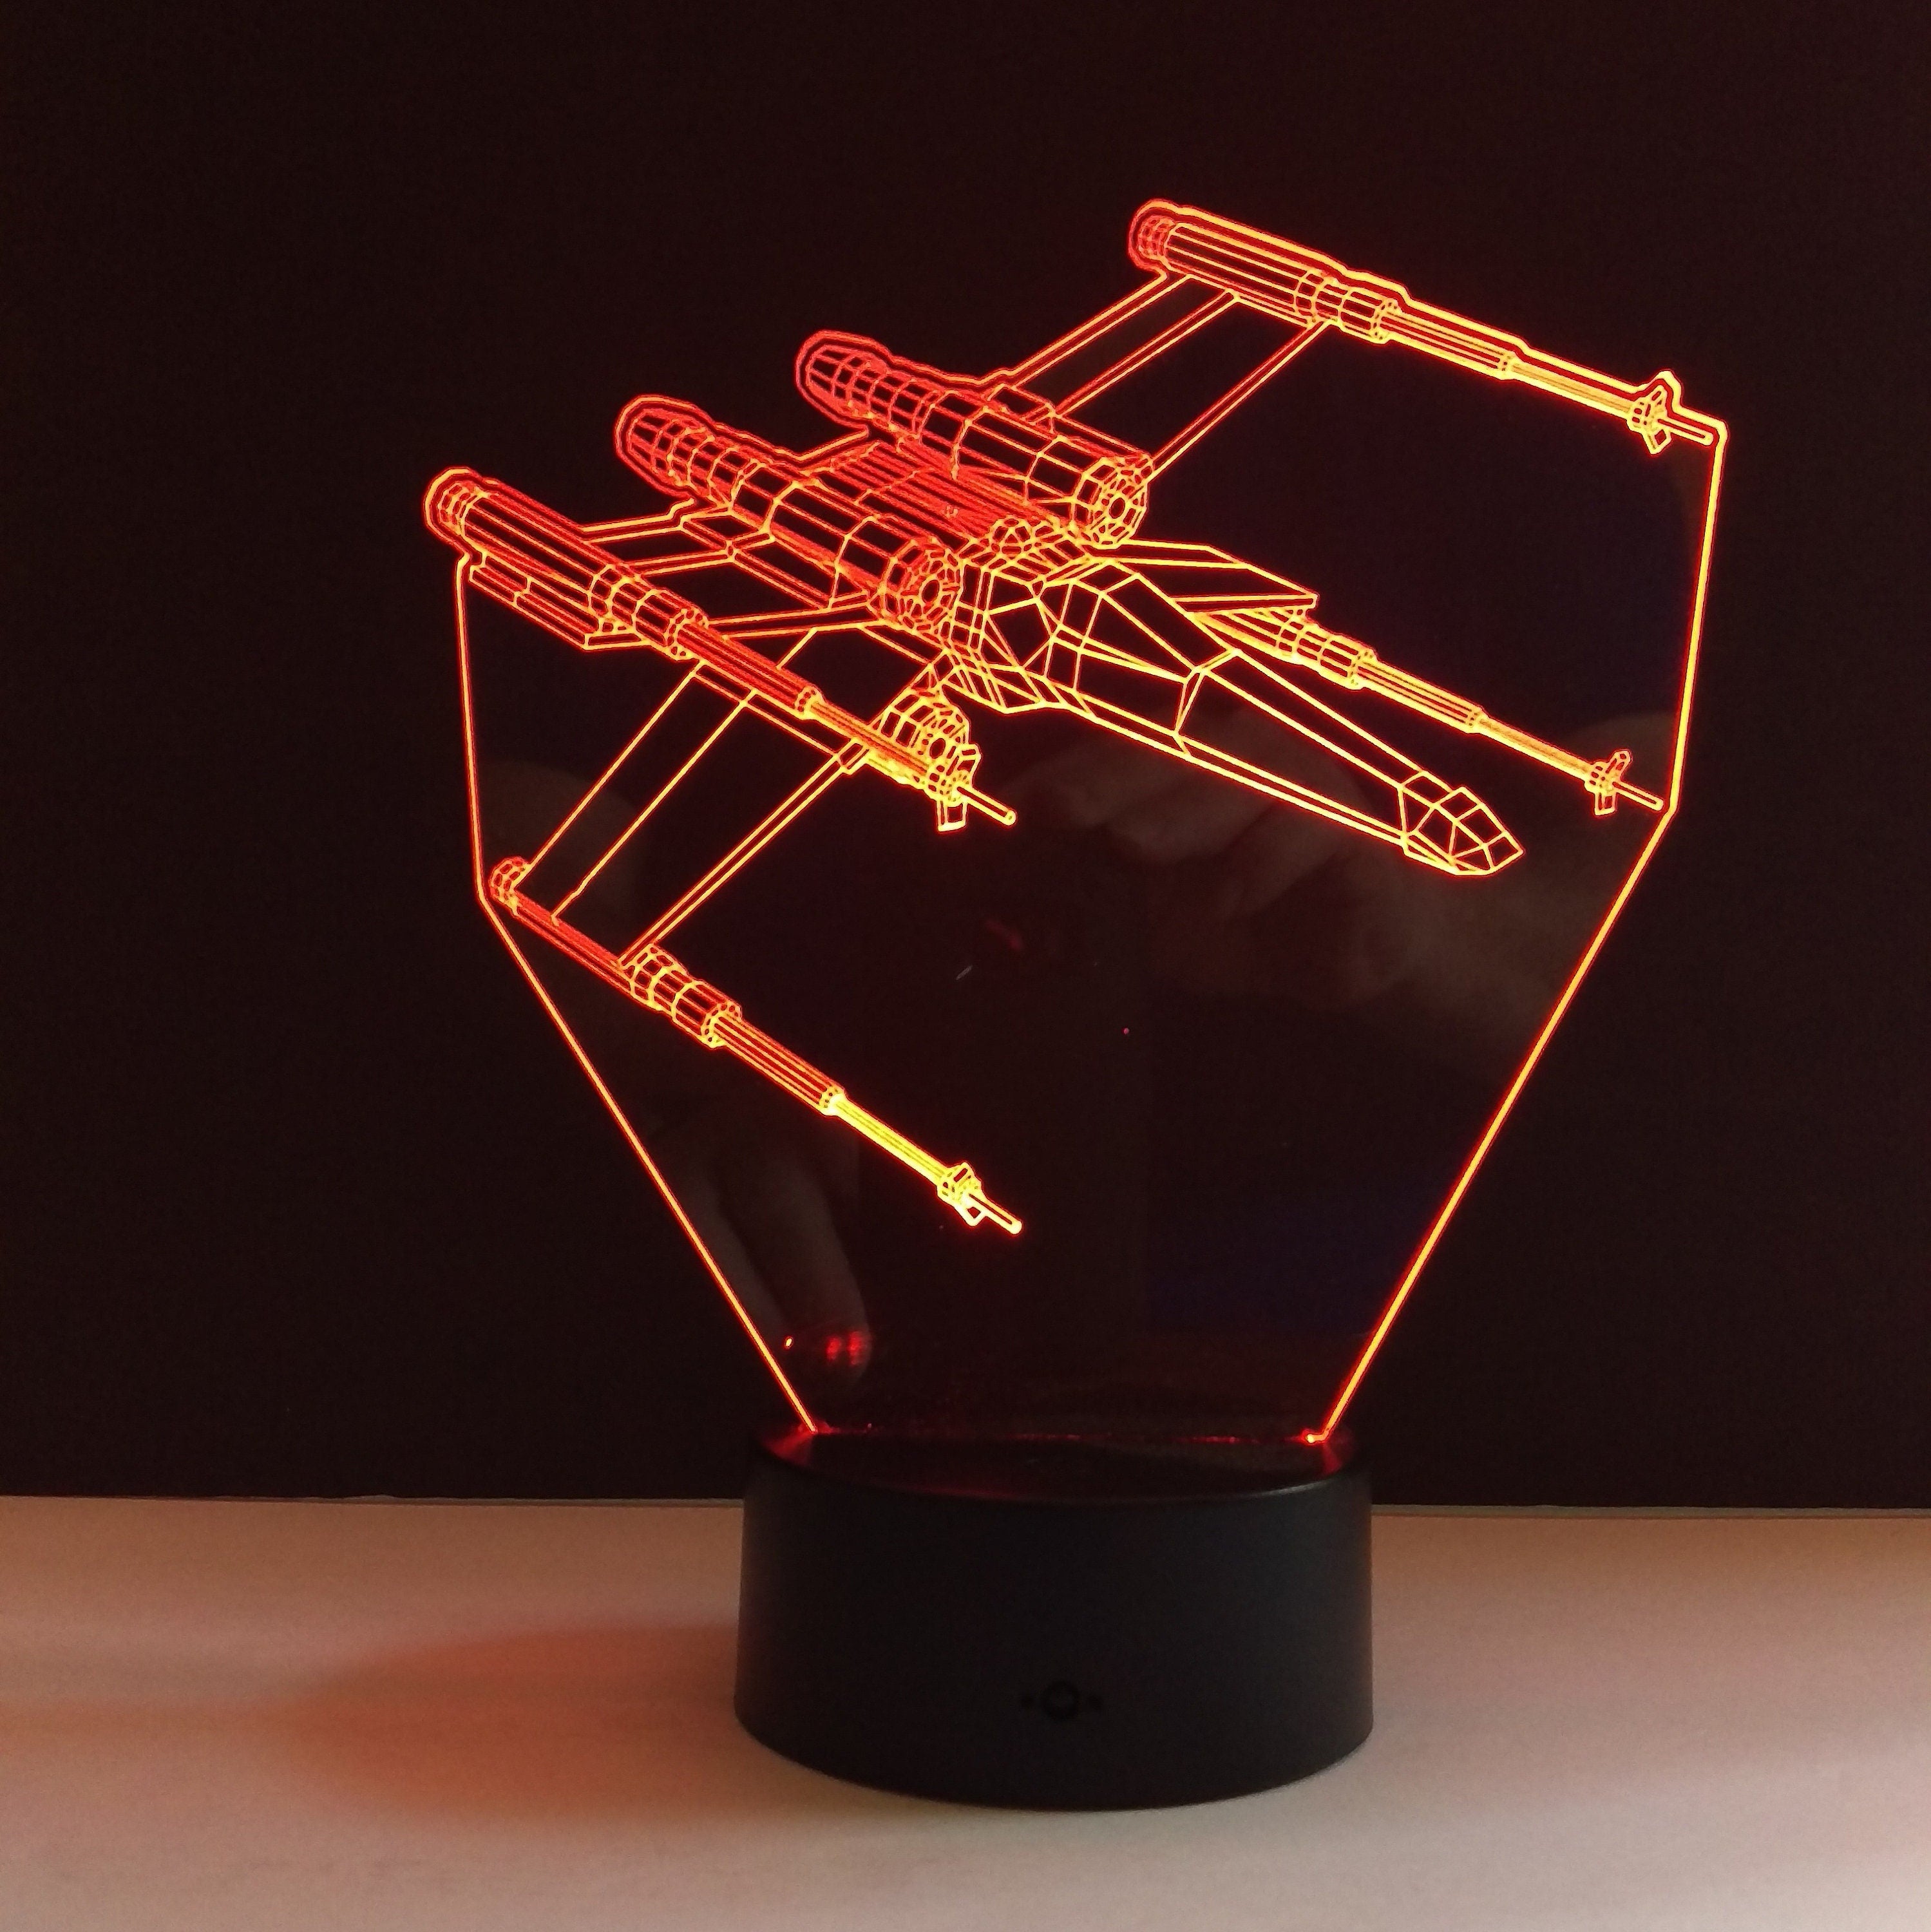 Awesome "Star Wars X-Wing Fighter" 3D LED Lamp (21205) - FREE Shipping!